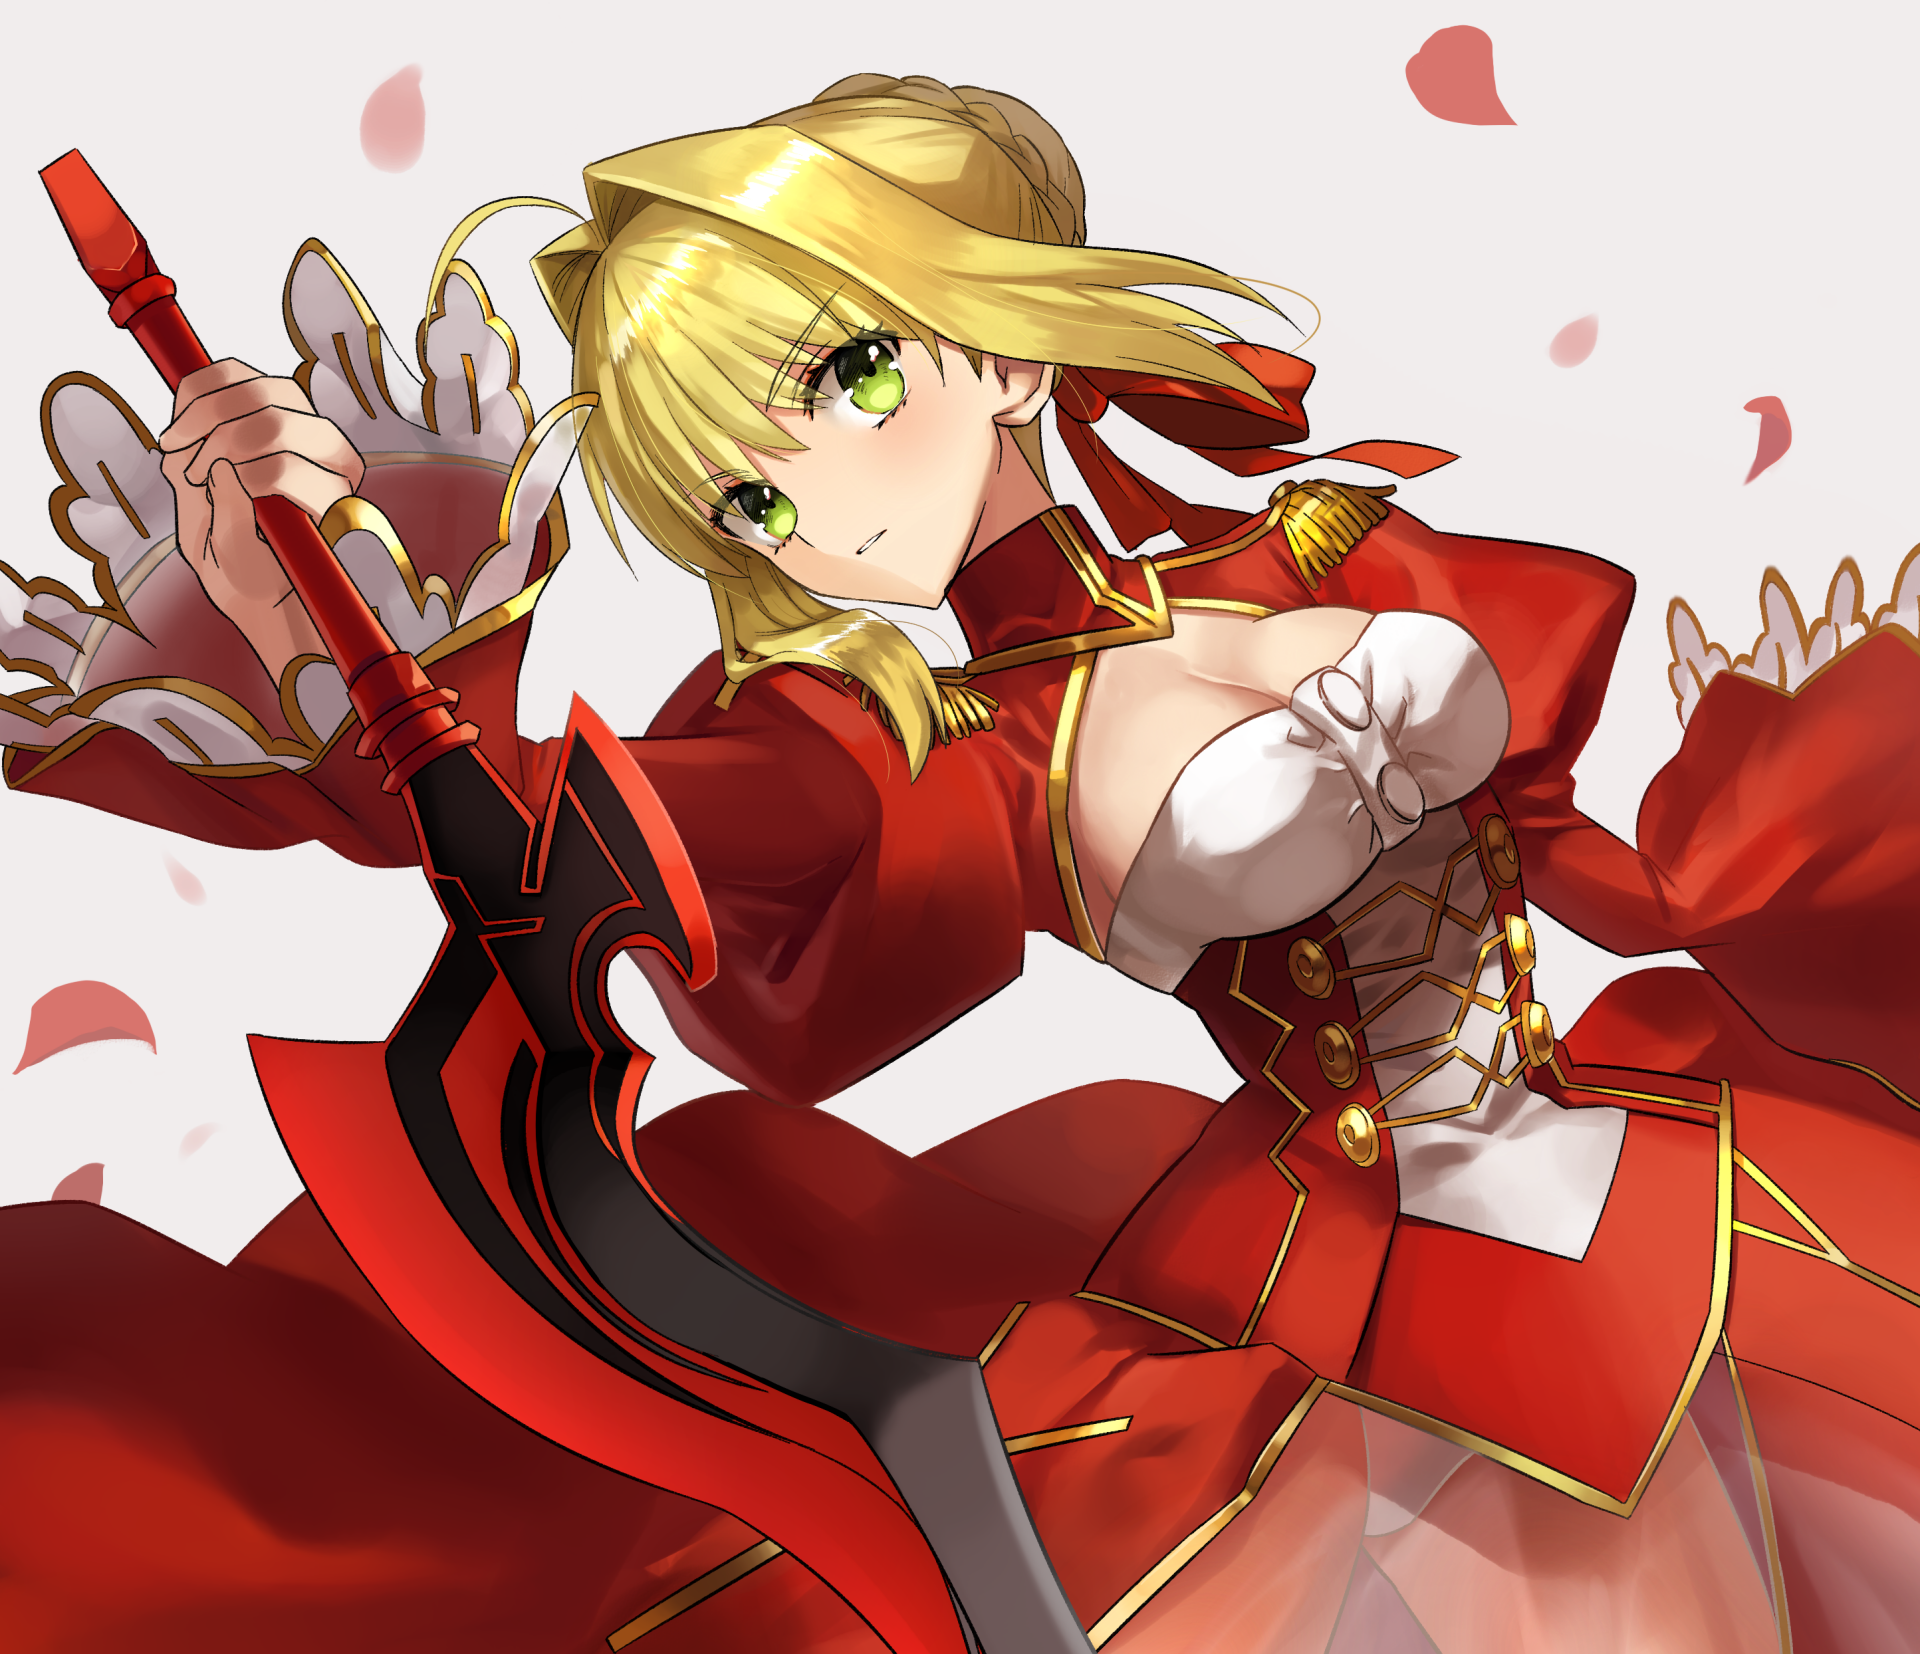 Download Saber Fate Series Nero Claudius Anime Fateextra Hd Wallpaper By 芦原 7736